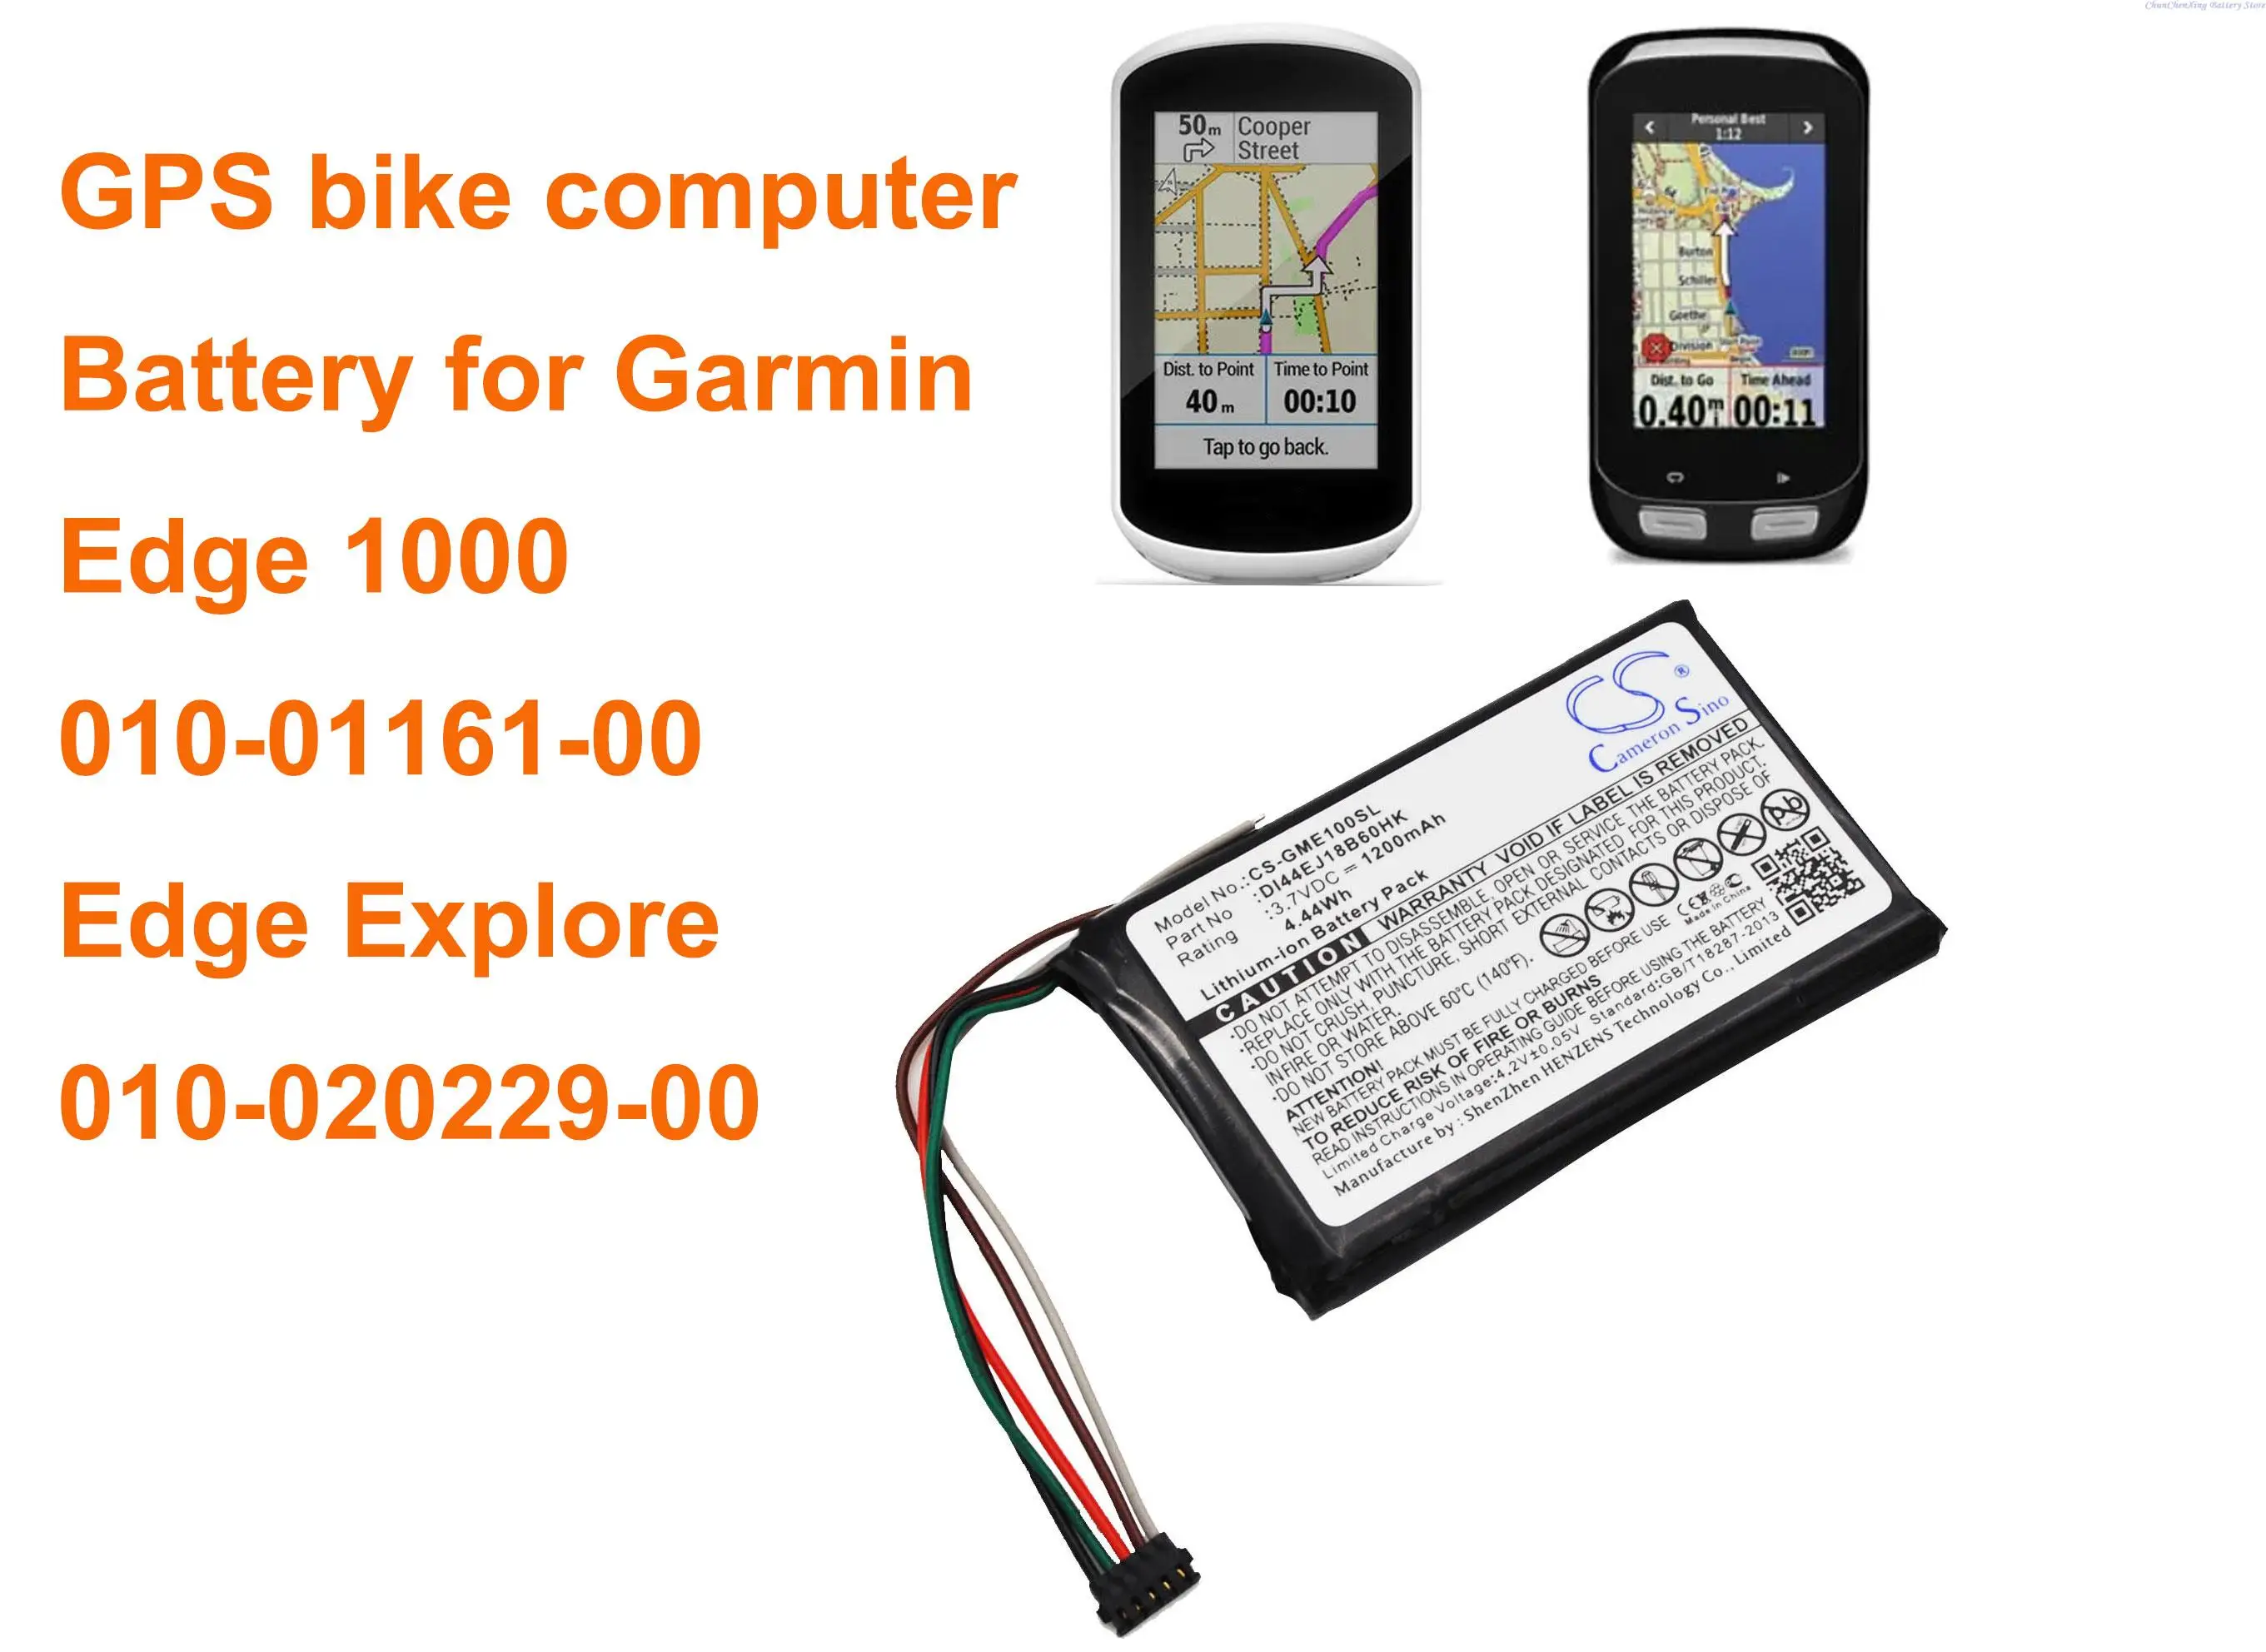 1100mAh/3.7V Battery Replacement for Garmin DriveSmart 5 LMT Drive 51LMT-S Nuvi 30 Nuvi 50LM Drive 50 LM Drive 51LMT Nuvi 55LMT Nuvi 55LM Nuvi 55 Nuvi 50 361-00056-00 361-00056-50 